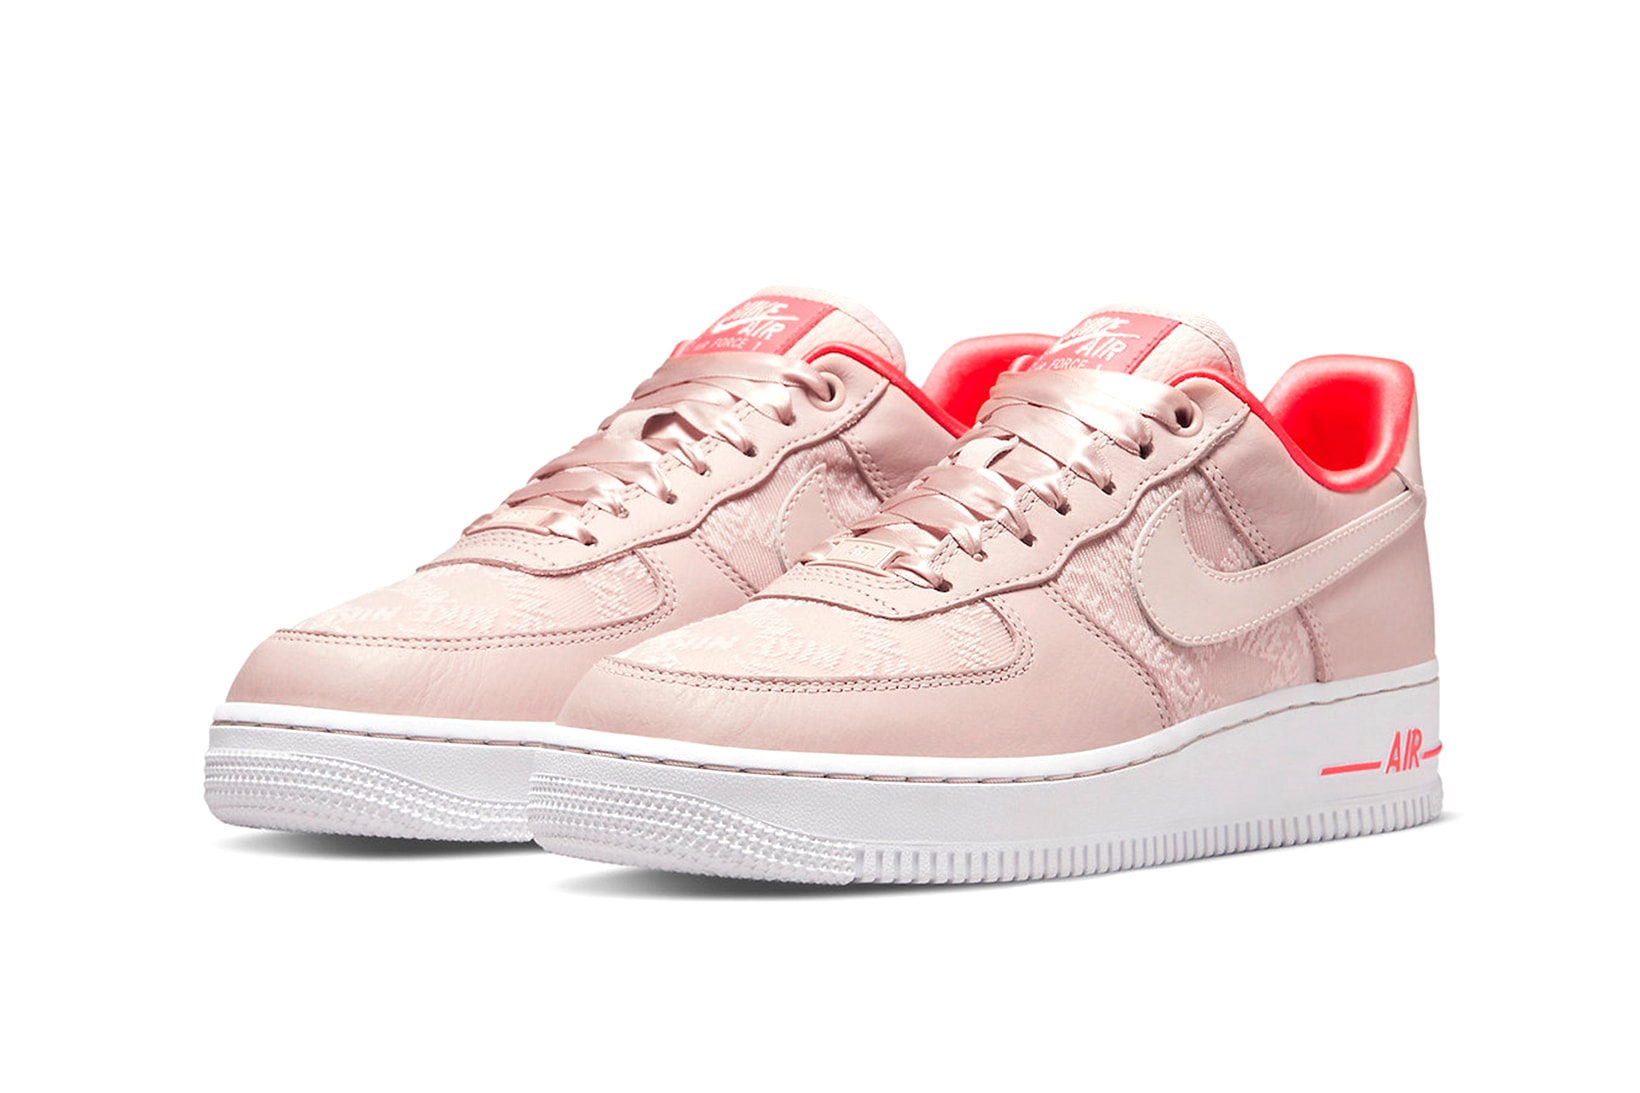 Nike Air Force 1 Low Satin Peach Beige Sneakers Release Info Side View